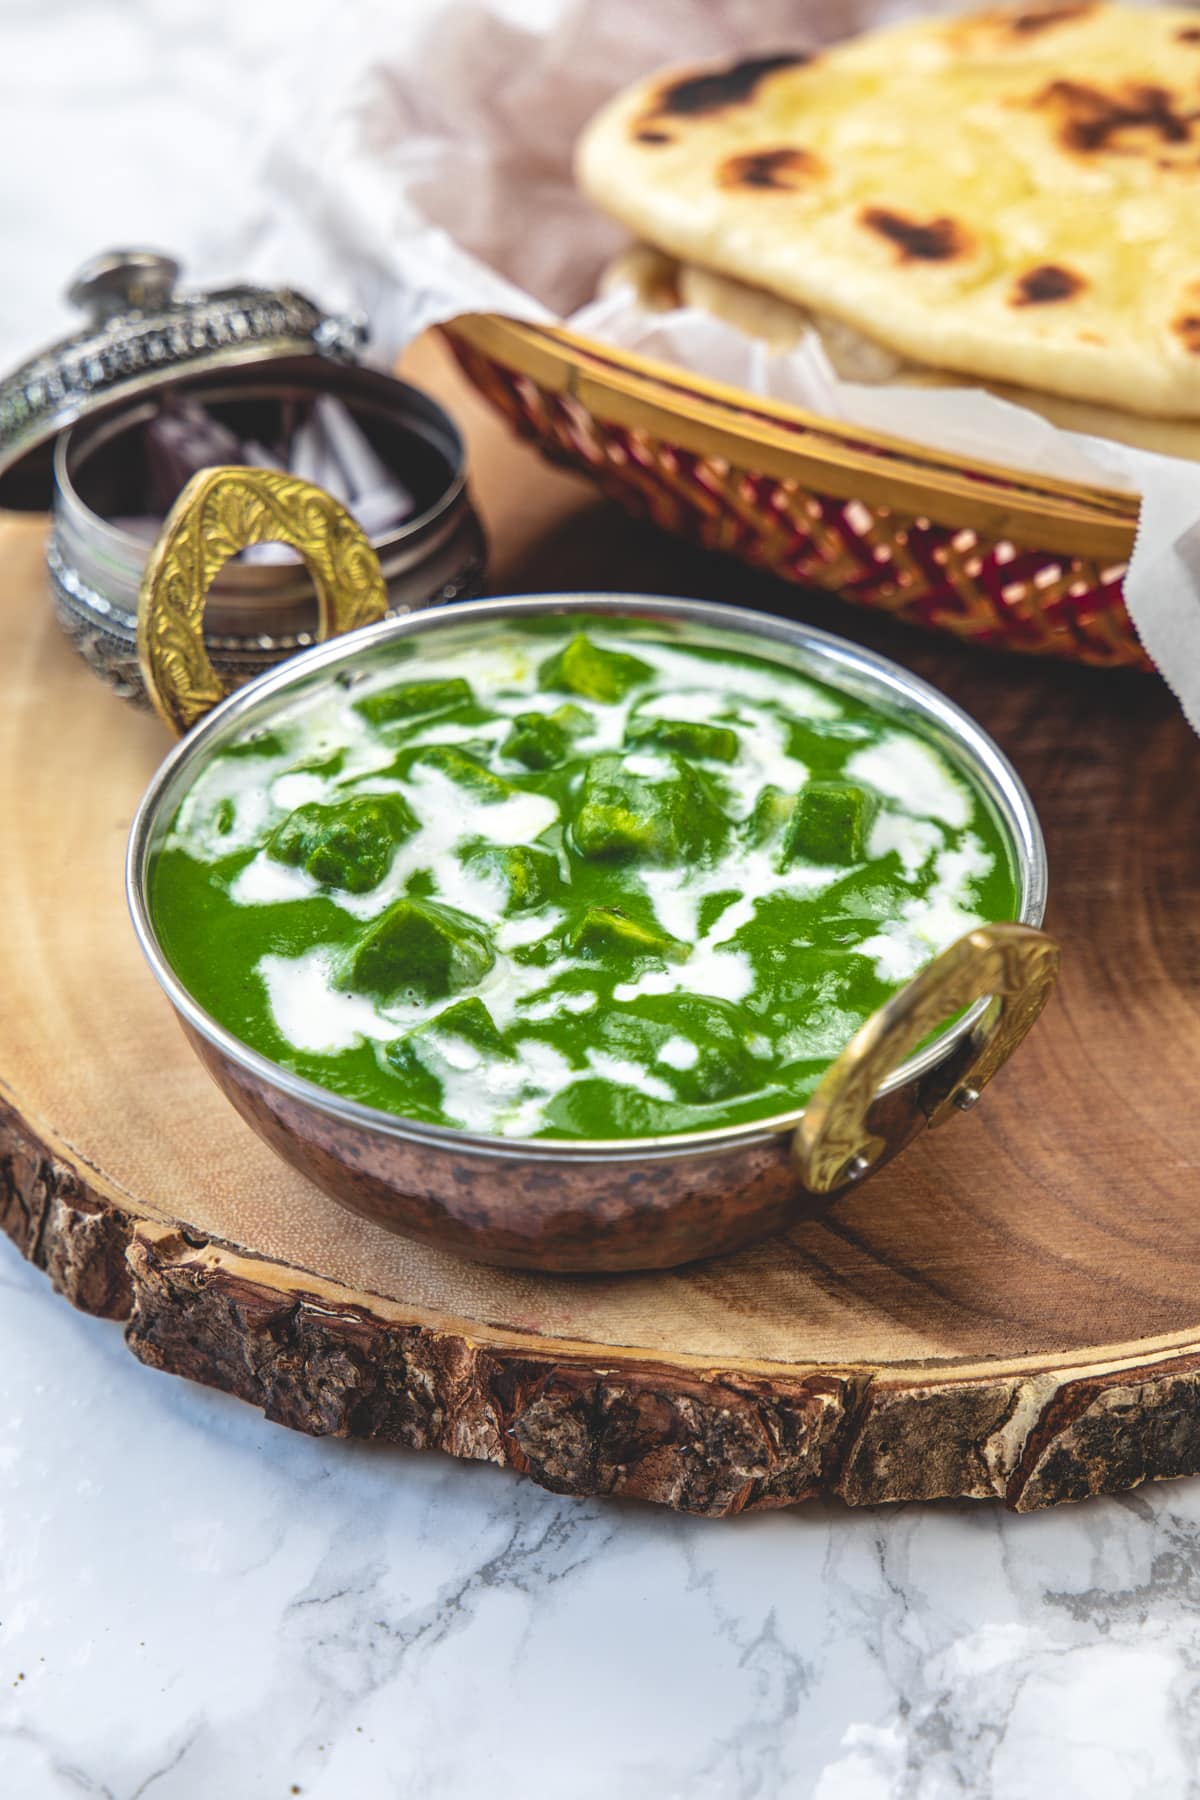 Palak paneer served in kadai with a garnish of cream and side of naan, onions.